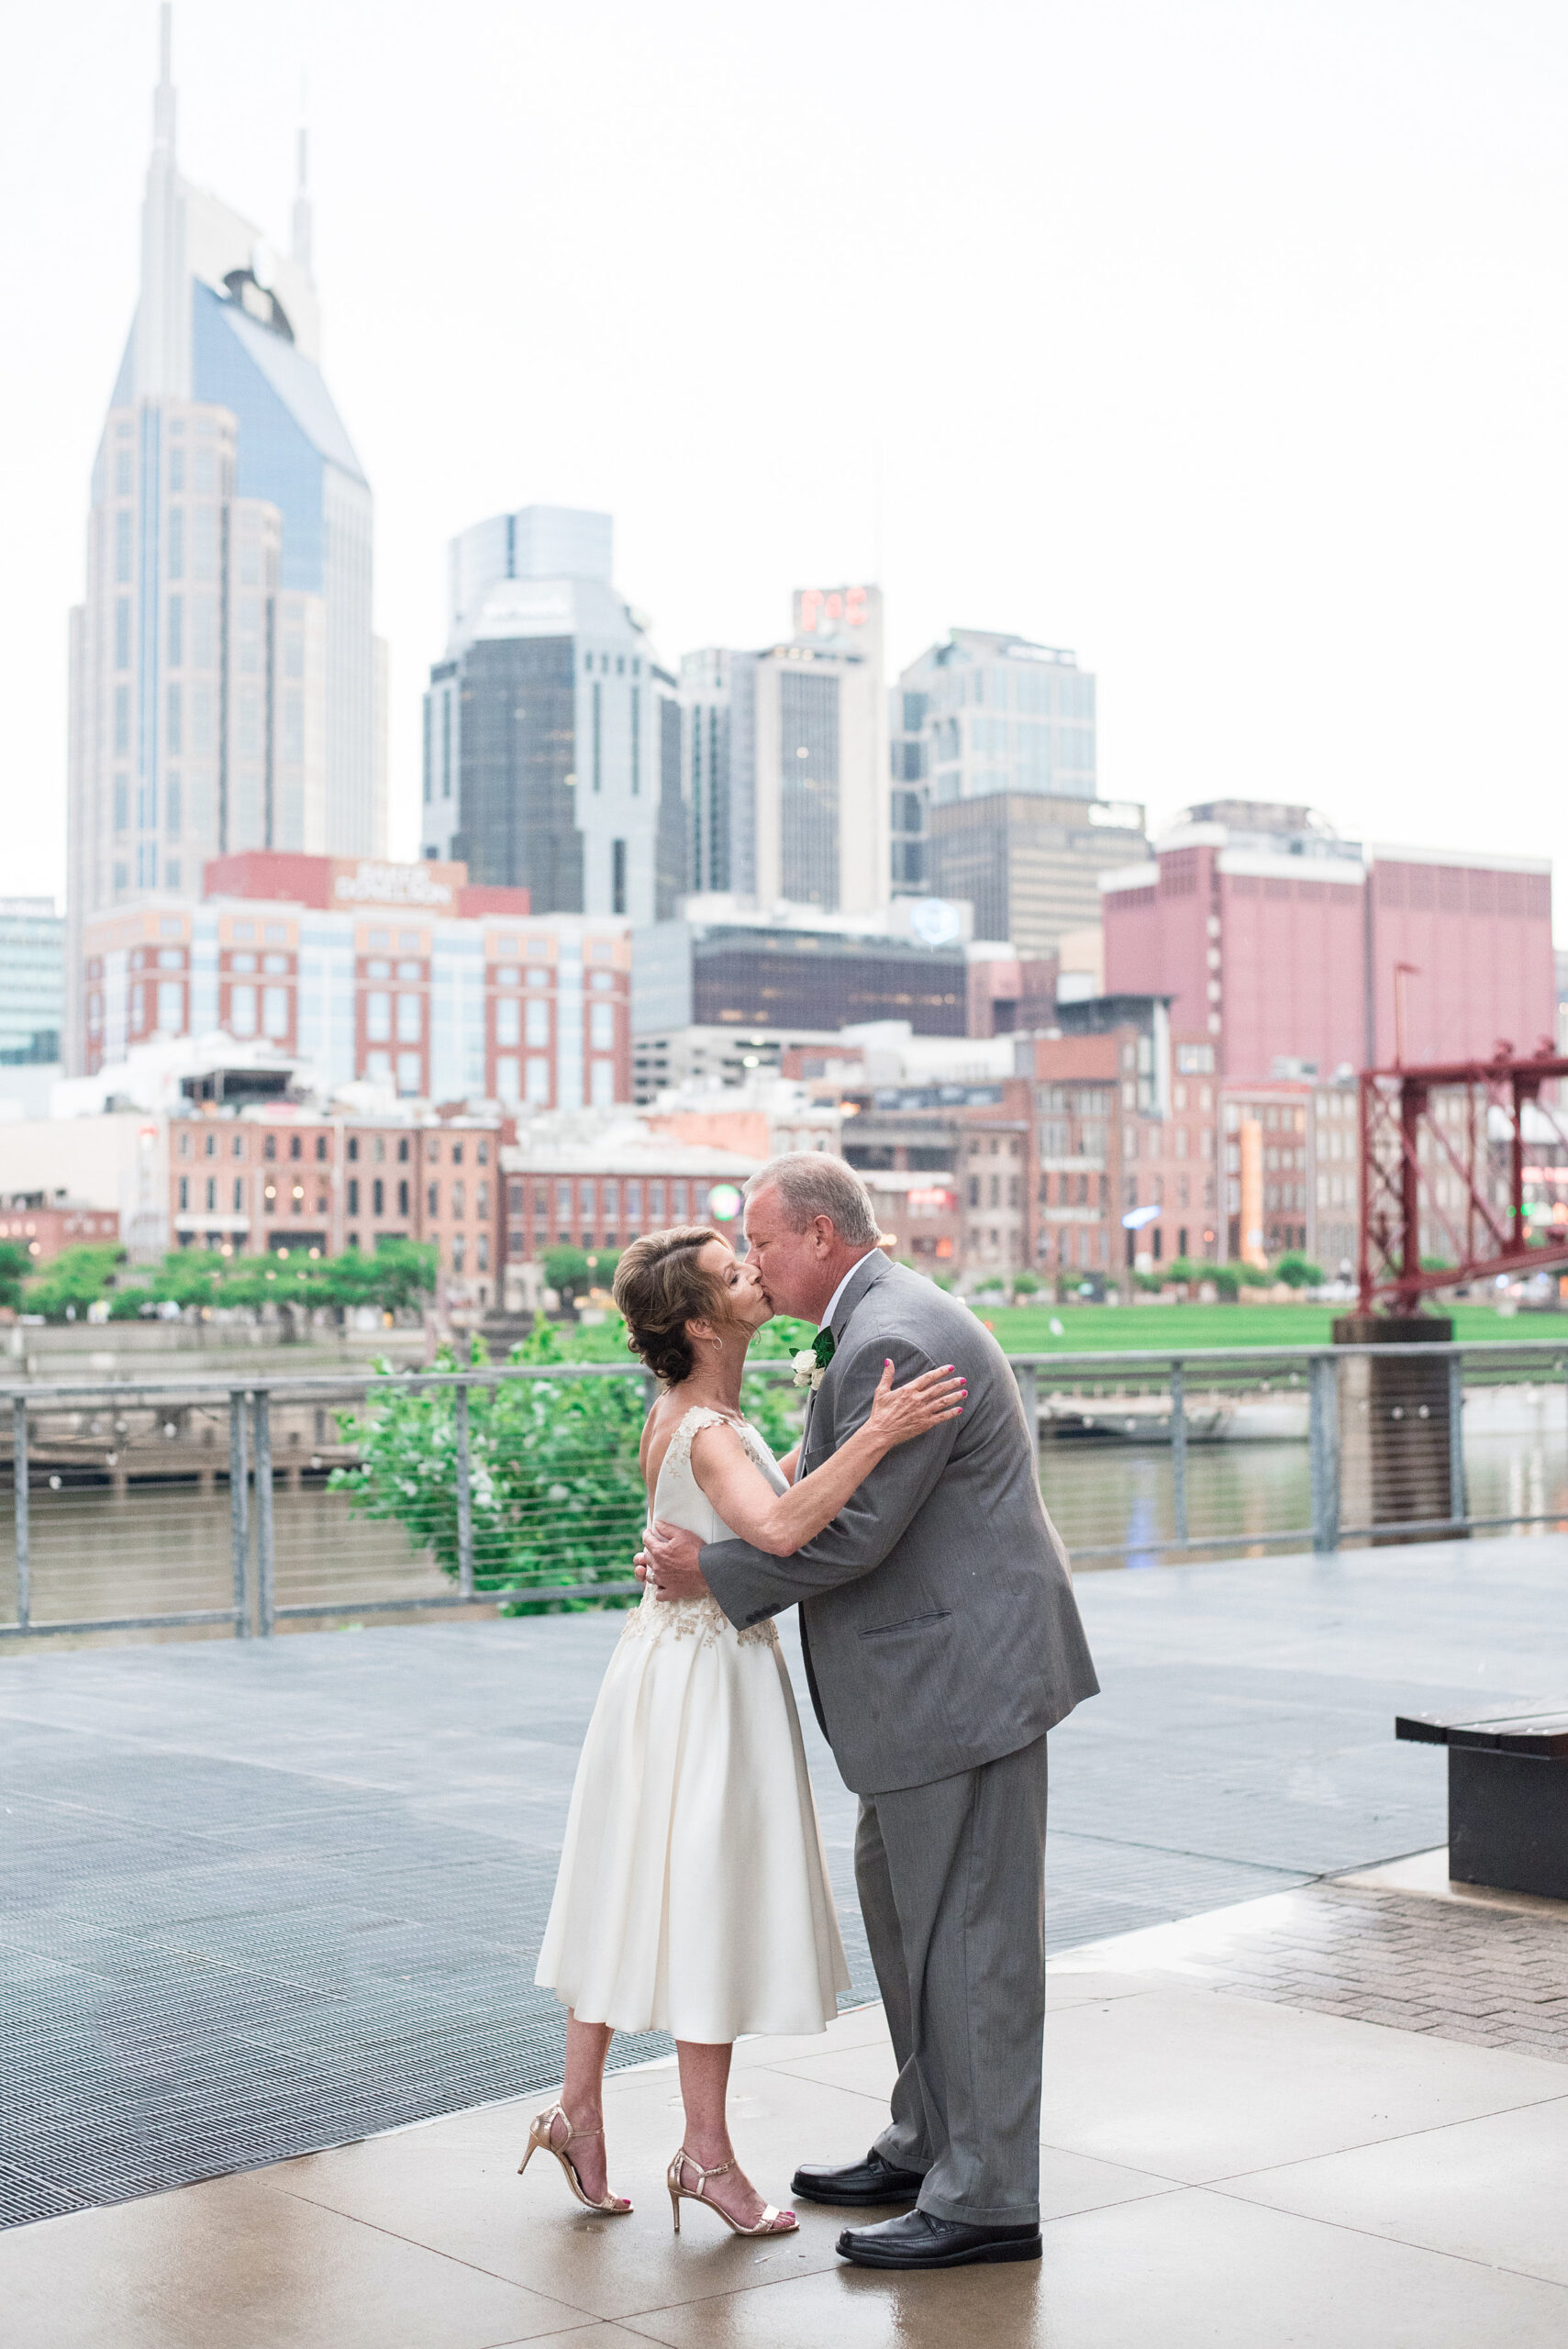 The bride, wearing a tea length white wedding dress with lacy floral accents and strappy gold stillettos embraces and kisses the groom who is wearing a gray suit with a white shirt. He has a white boutonniere pinned to his lapel. The Cumberland River and Nashville skyline are in the background behind them. 